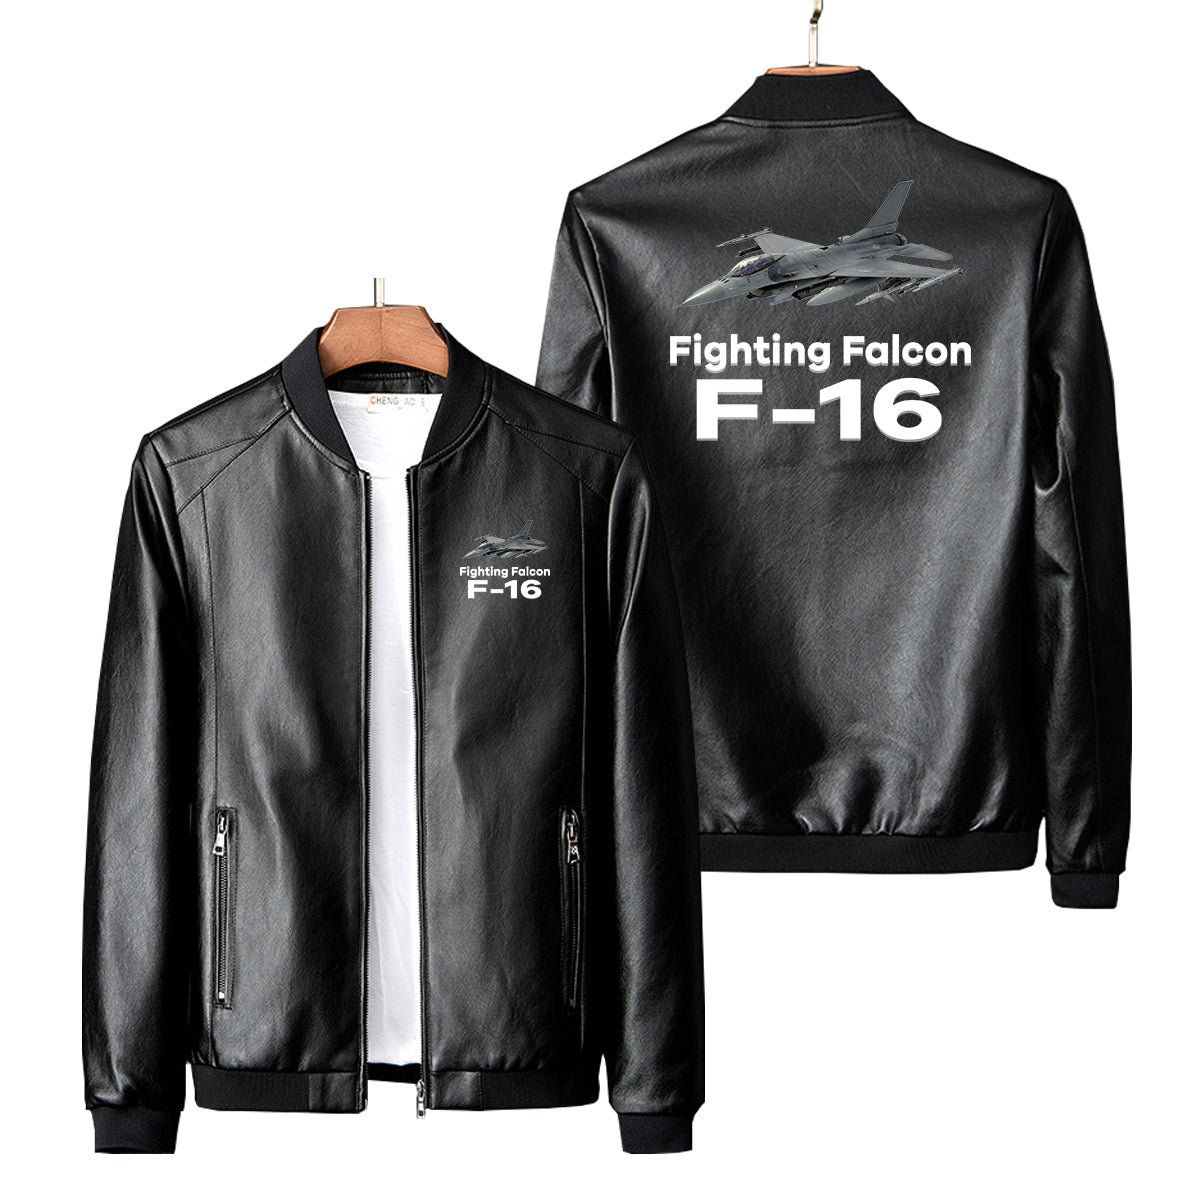 The Fighting Falcon F16 Designed PU Leather Jackets